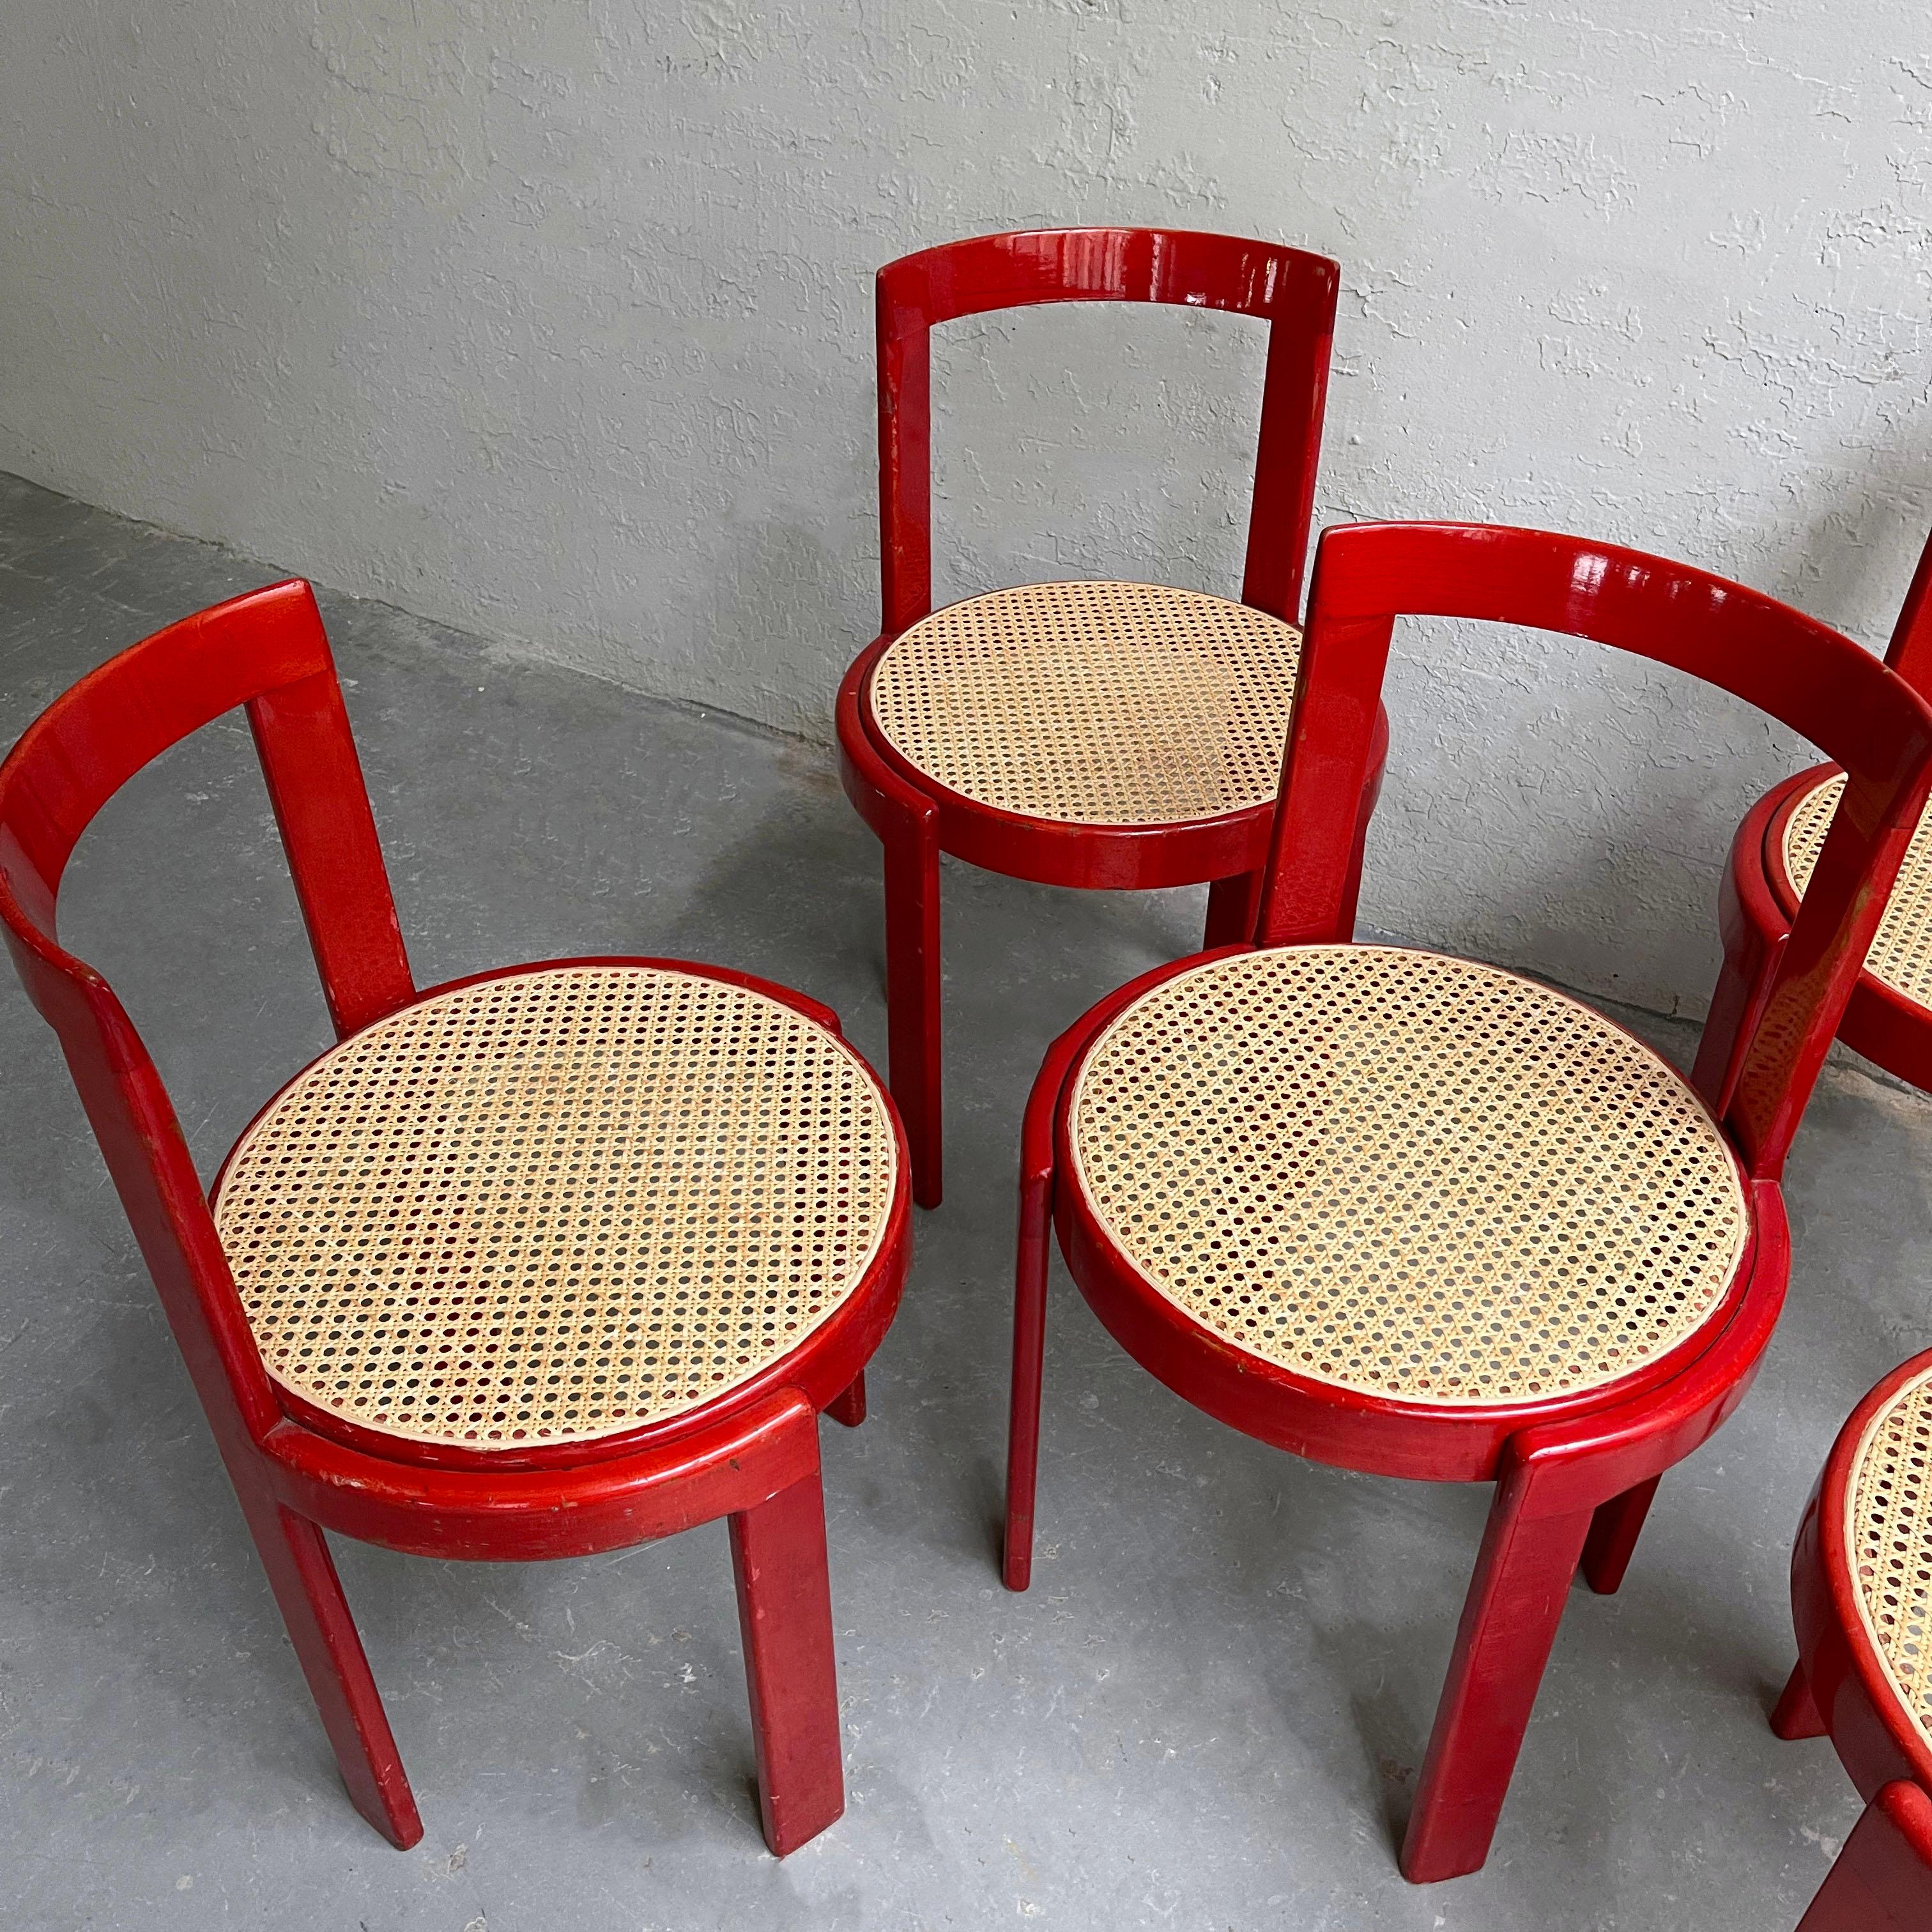 Italian Modernist Circular Bentwood And Cane Dining Chairs Set Of 6 For Sale 4